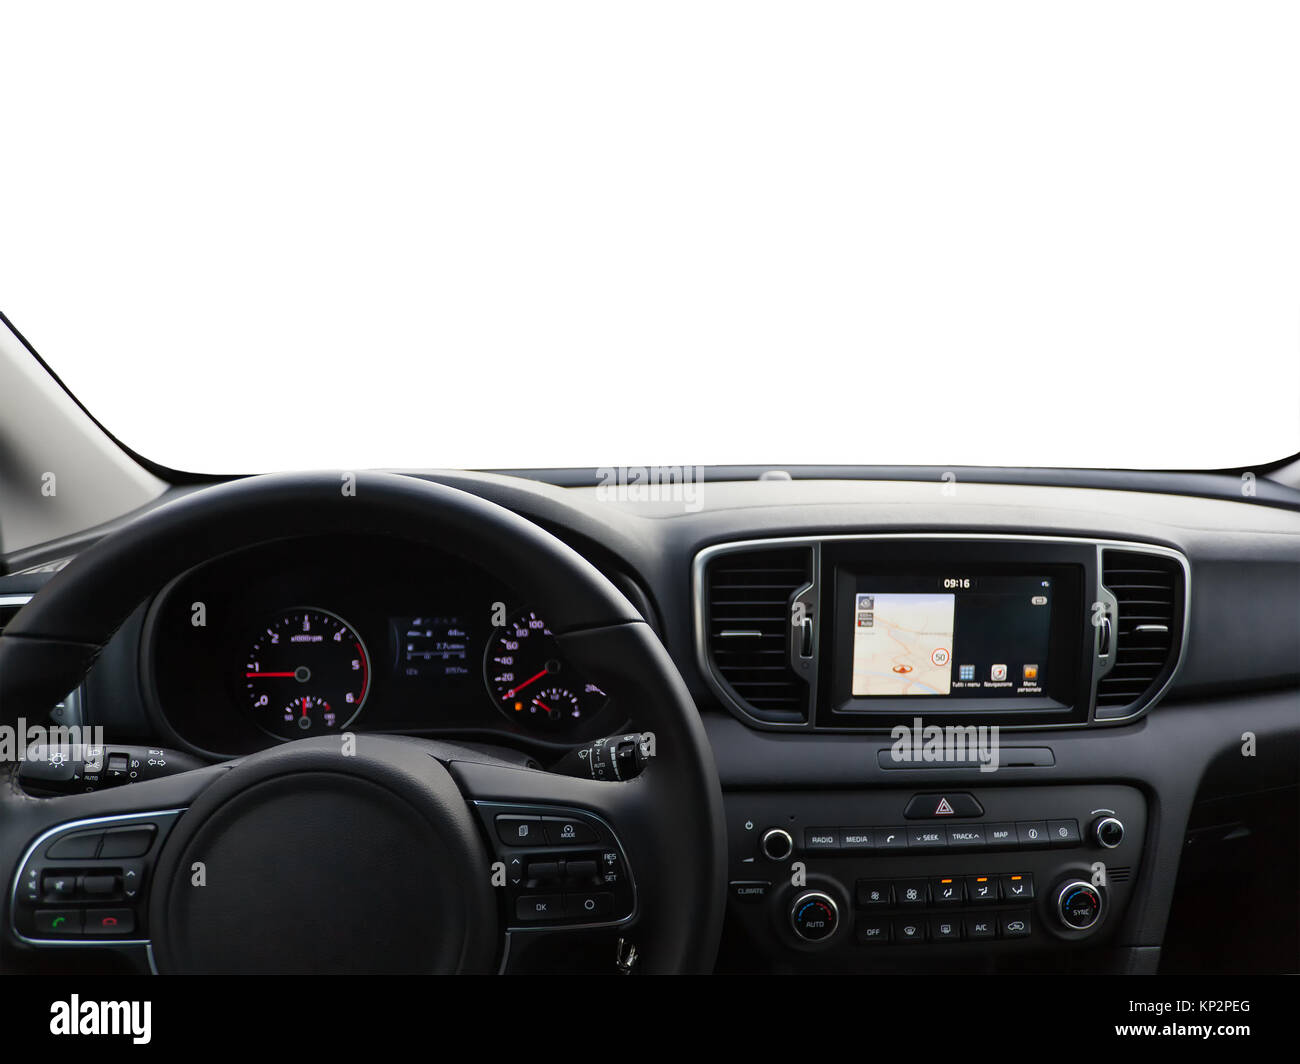 View of a car dashboard with a navigation unit. View of the empty windshield for customization. Stock Photo